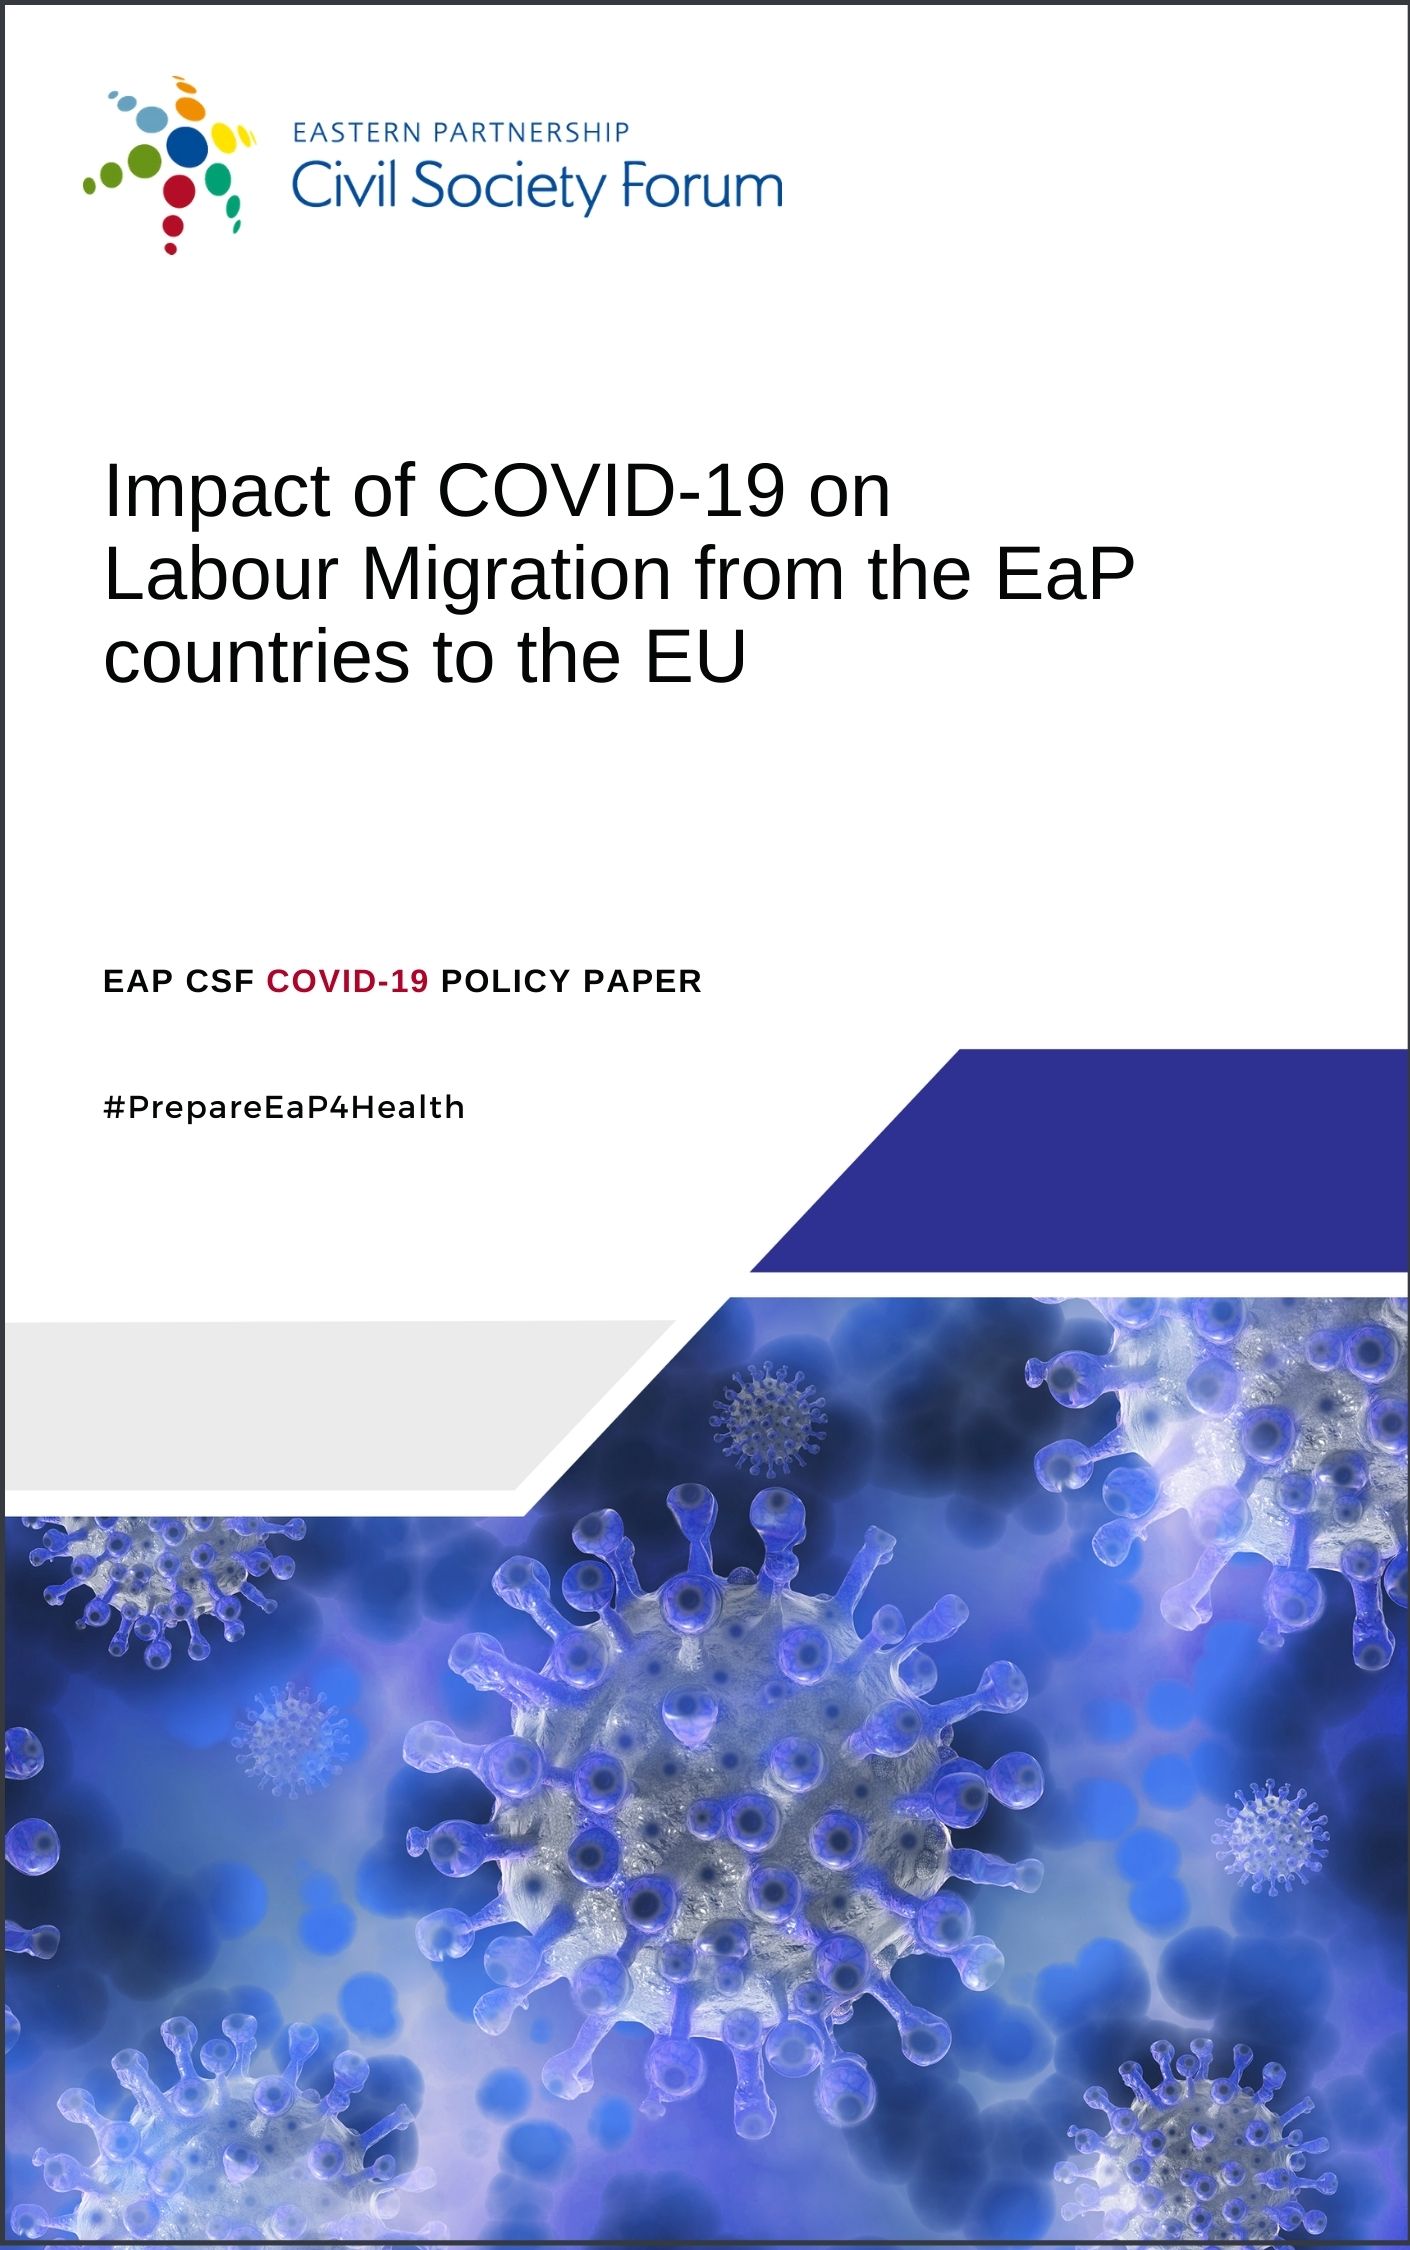 Impact of COVID-19 on labour migration from EaP countries to the EU